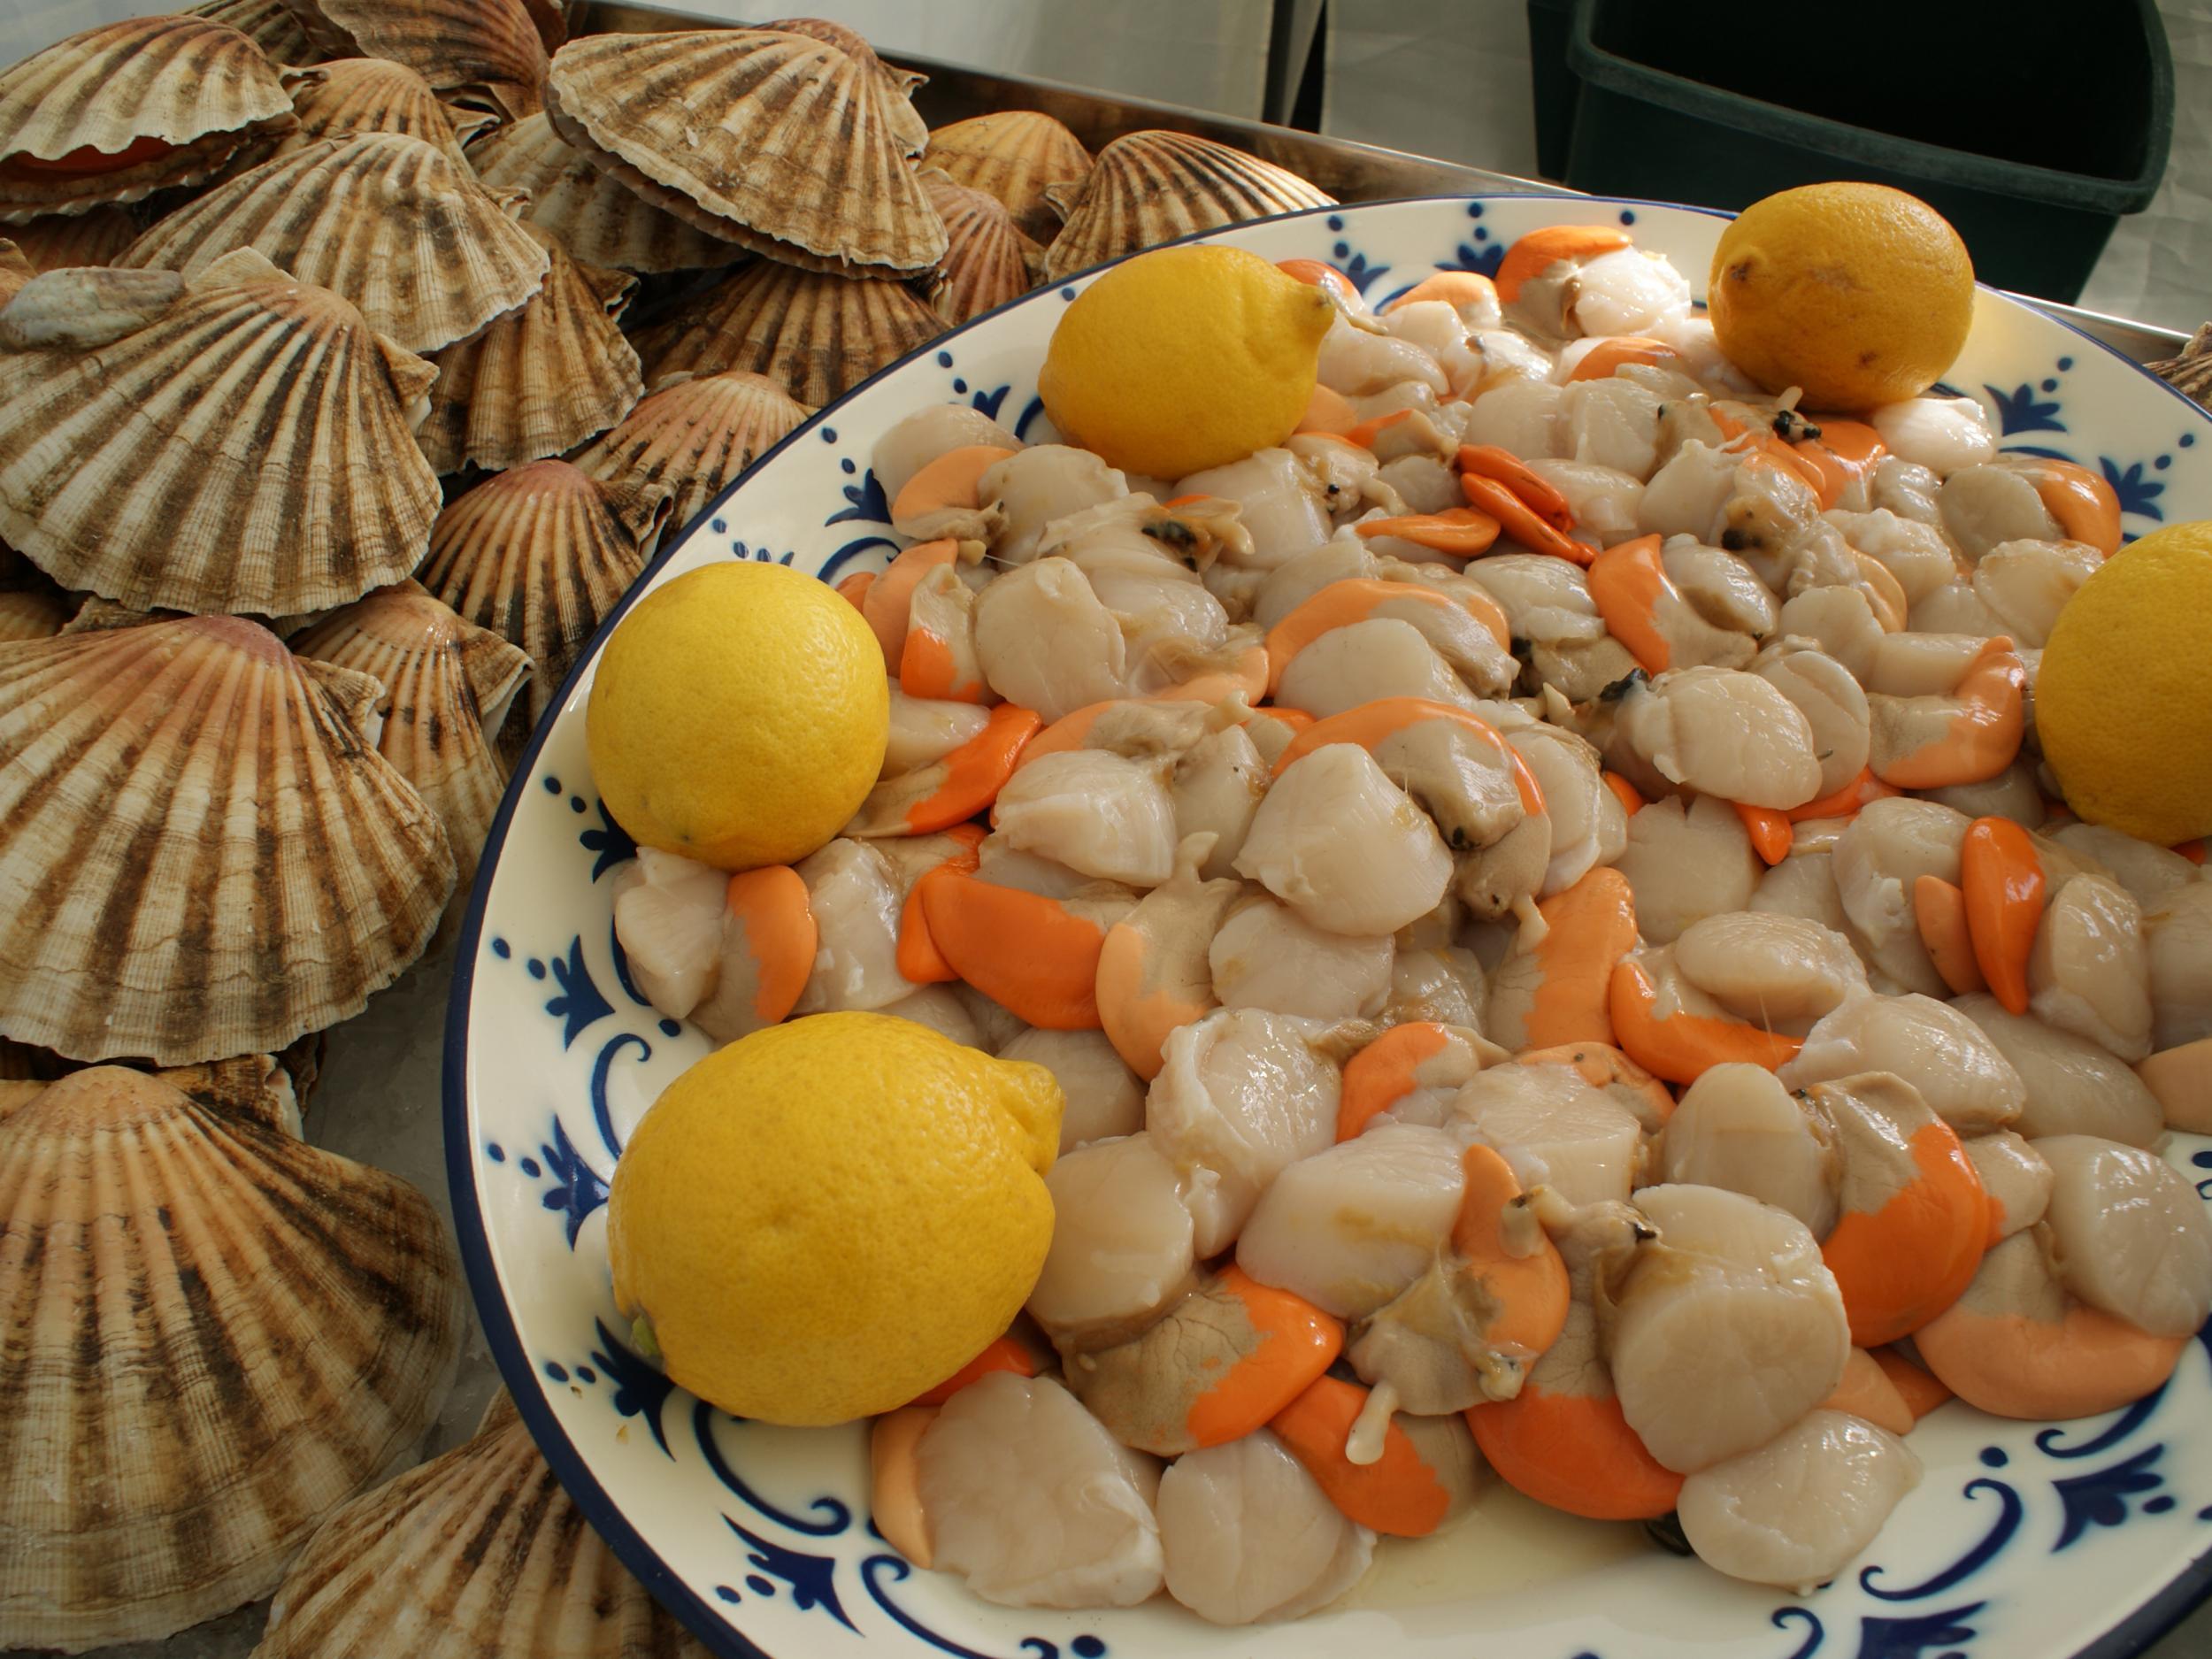 The Rye Bay Scallop Festival signifies that scallops are at the peak of the season